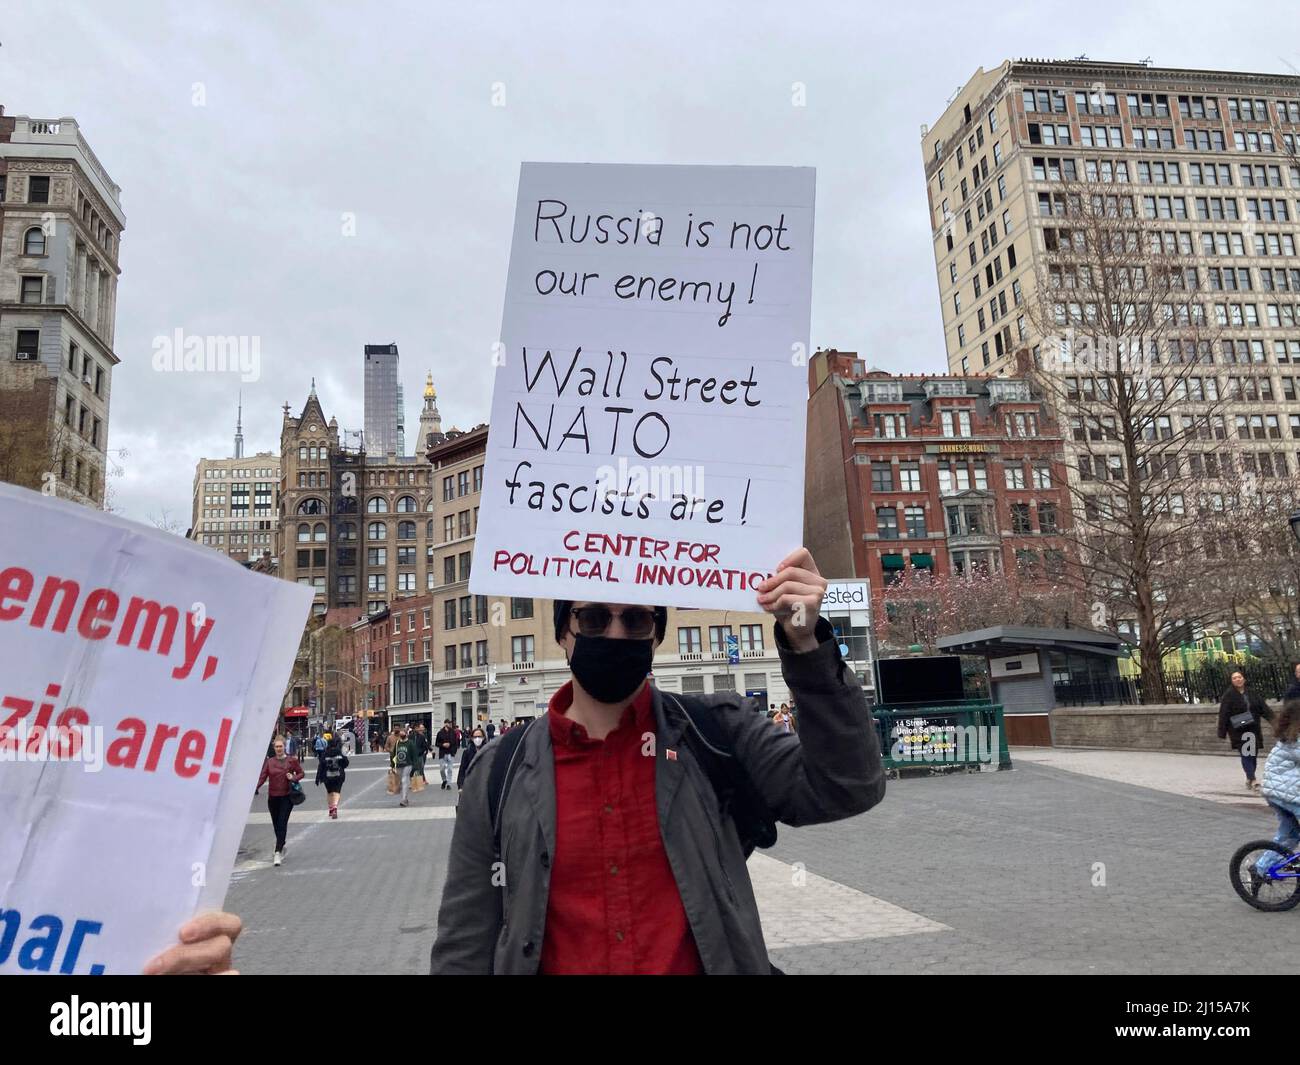 A small band of pro-Russian activists march around Union Square Park in New York showing support for Russia on Sunday, March 20, 2022. (© Frances M. Roberts) Stock Photo